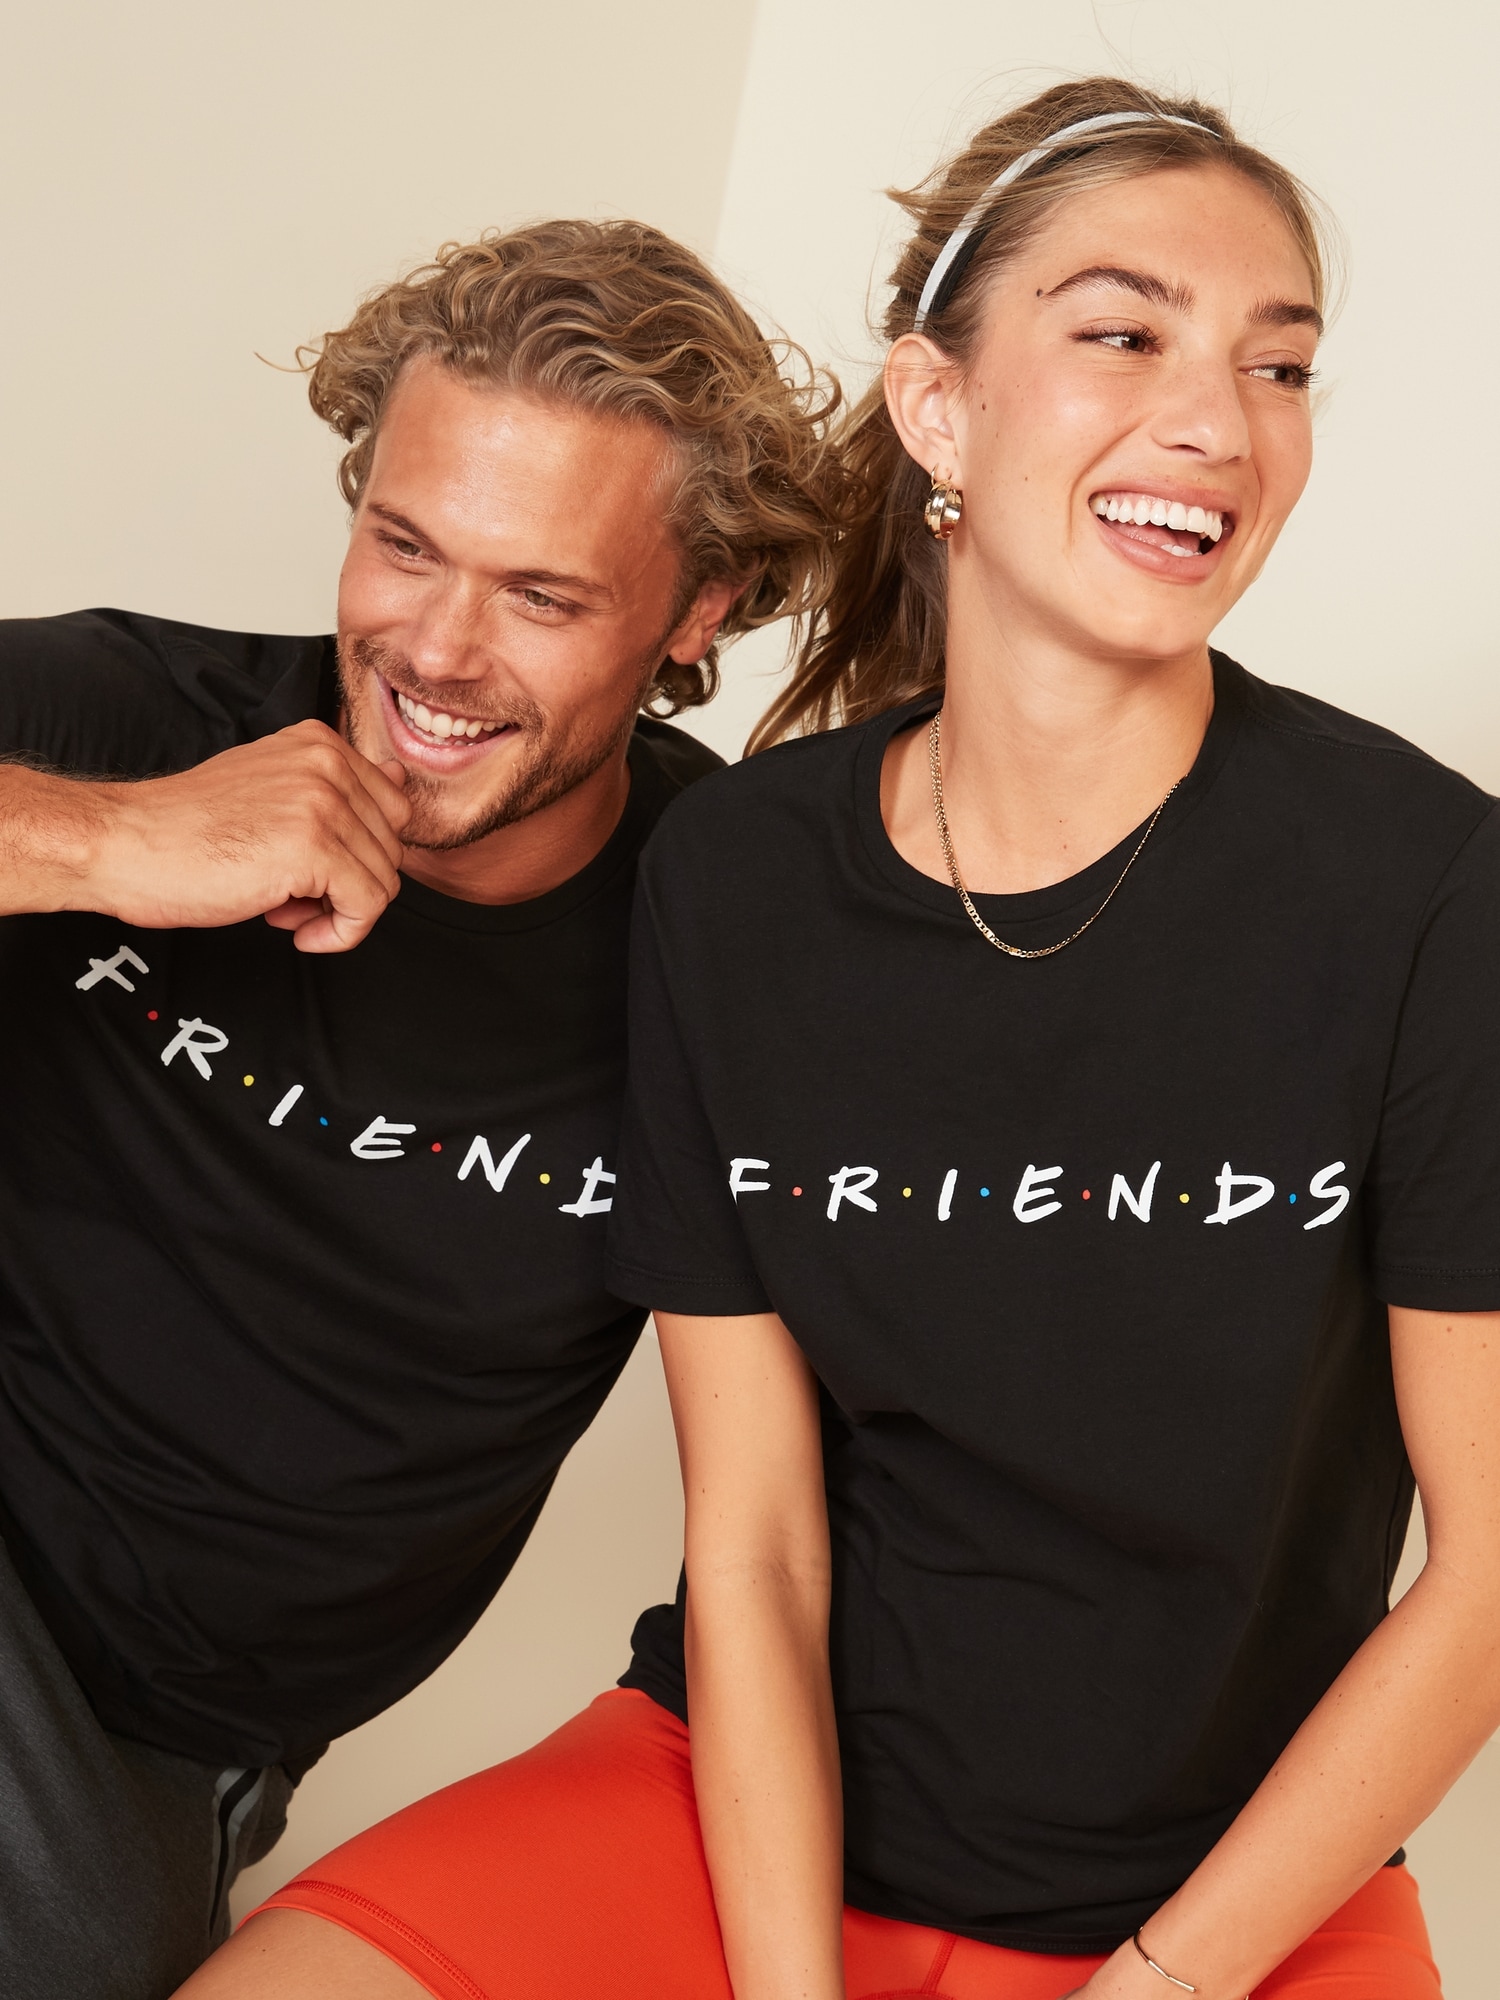 Friends™ Gender Neutral T Shirt for Adults   Old Navy